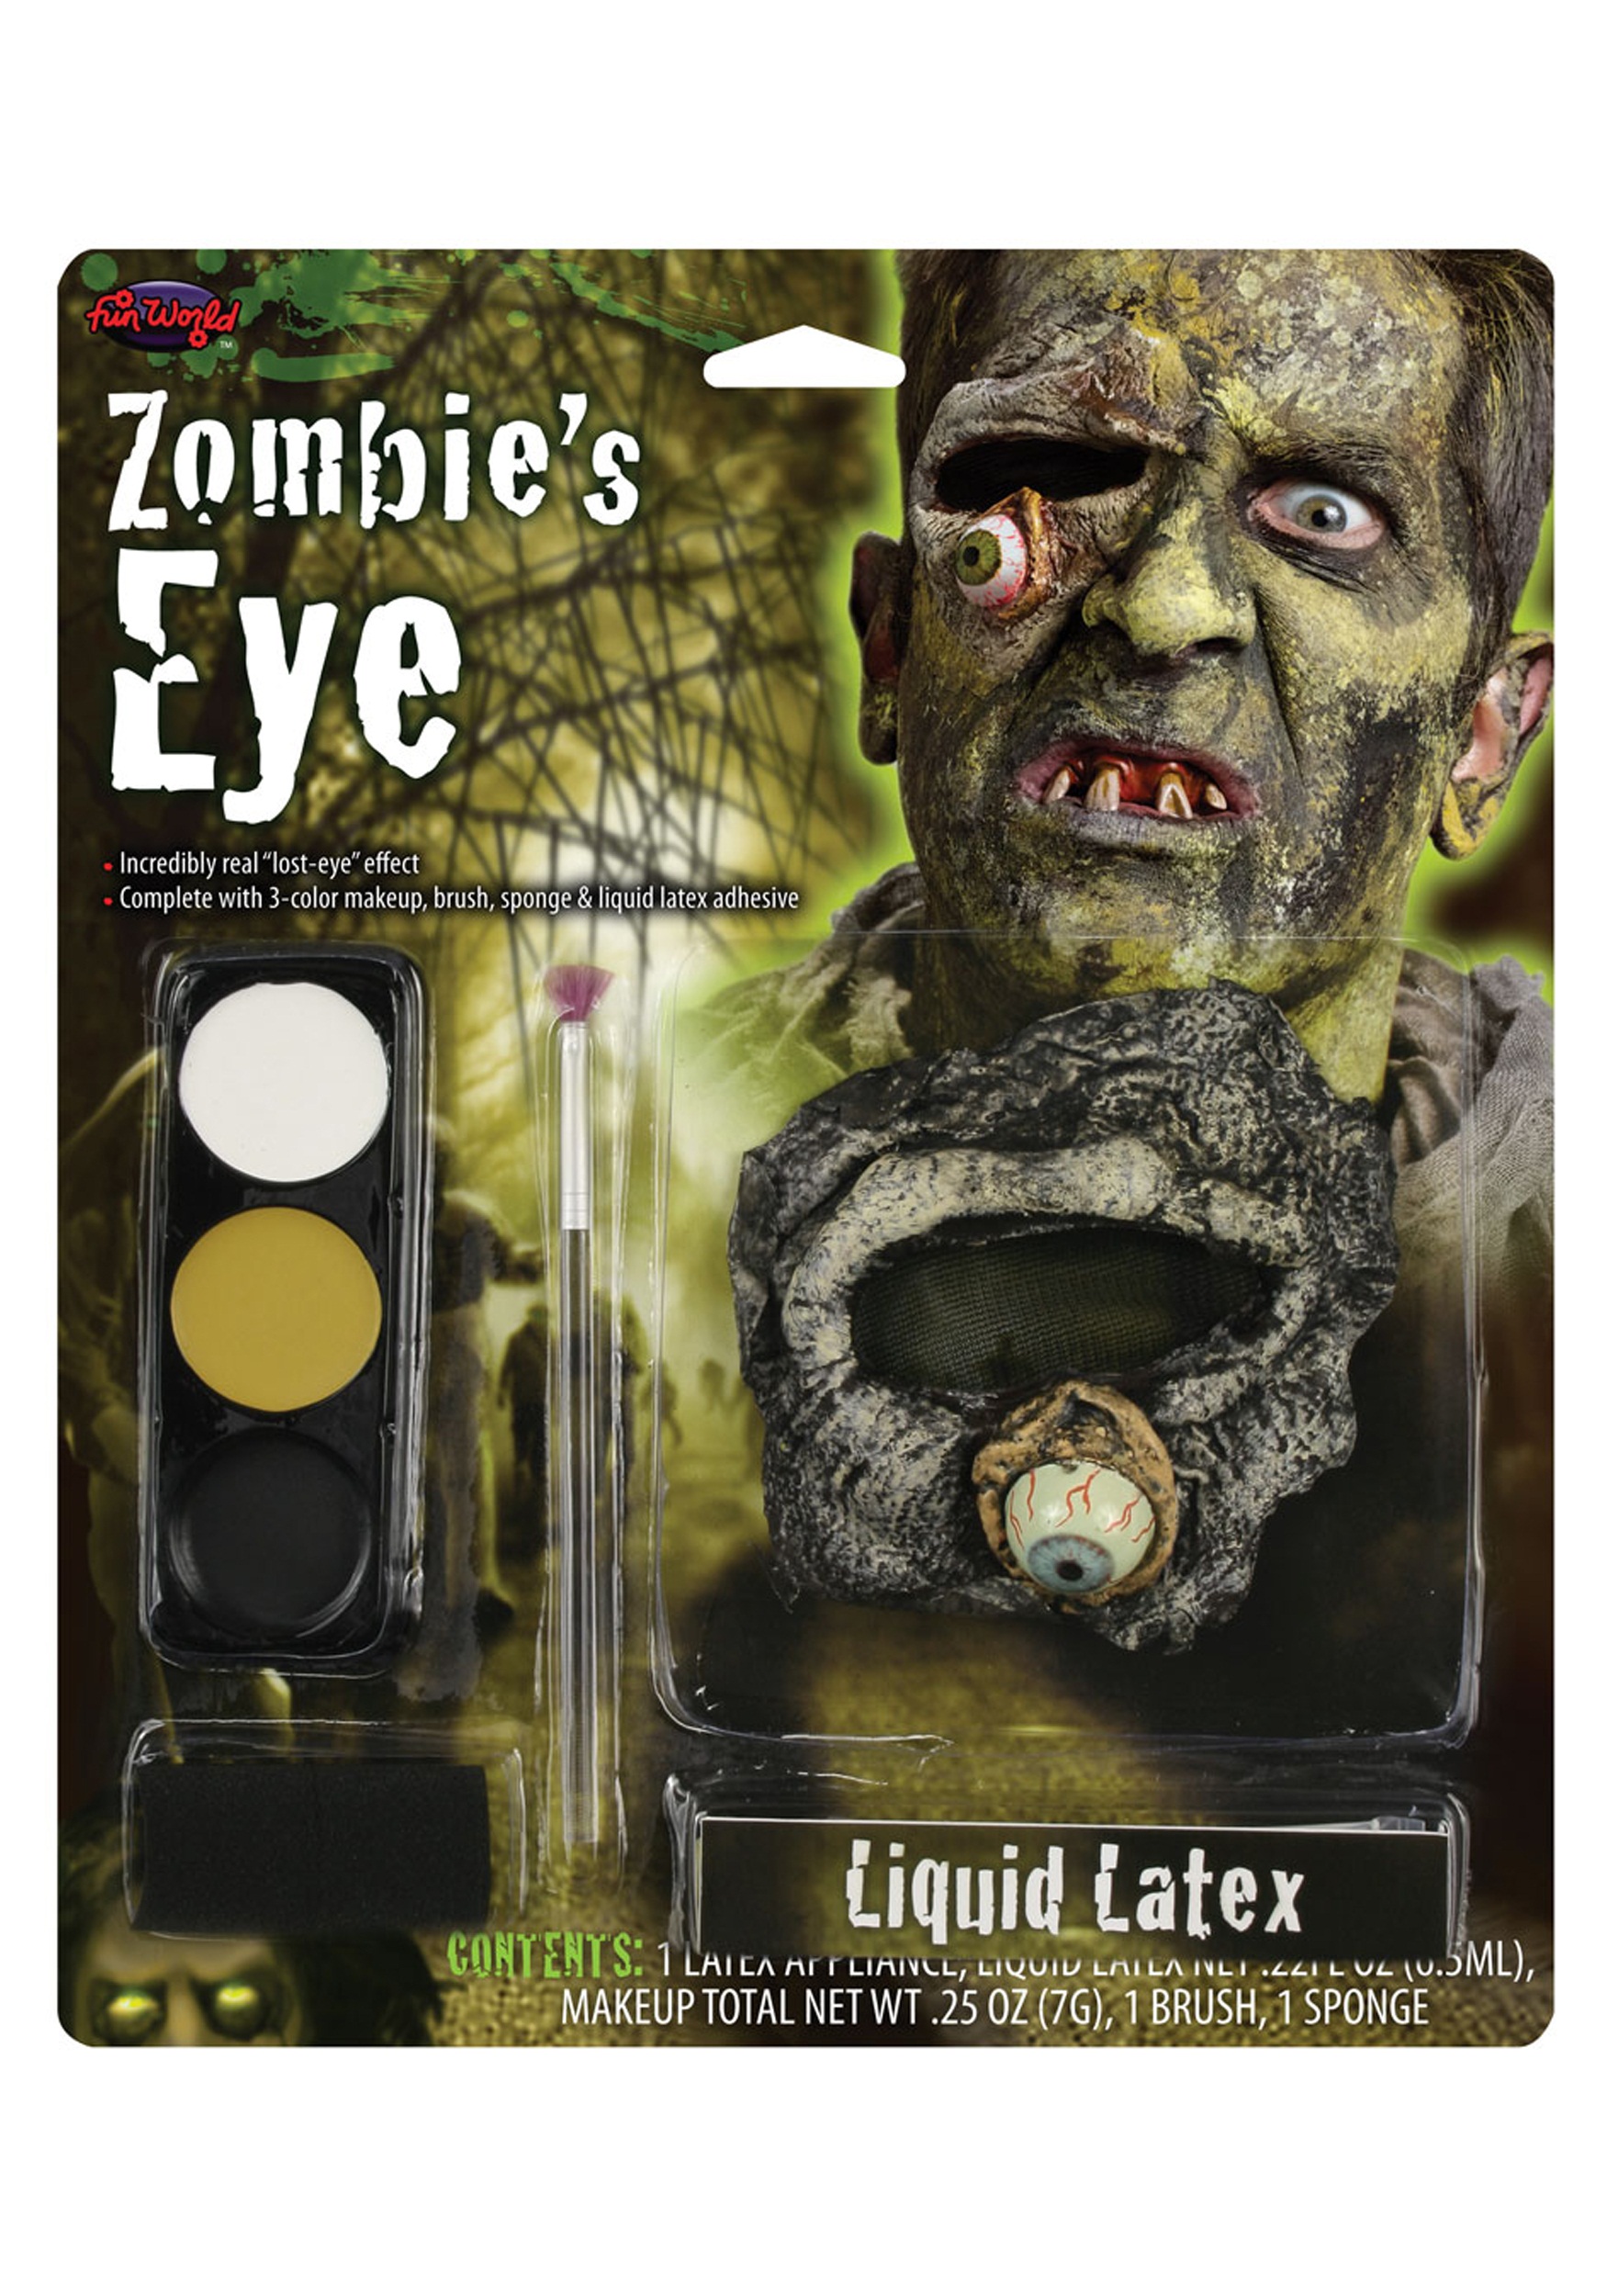 Top Scary Zombie Halloween Costume Ideas This Year